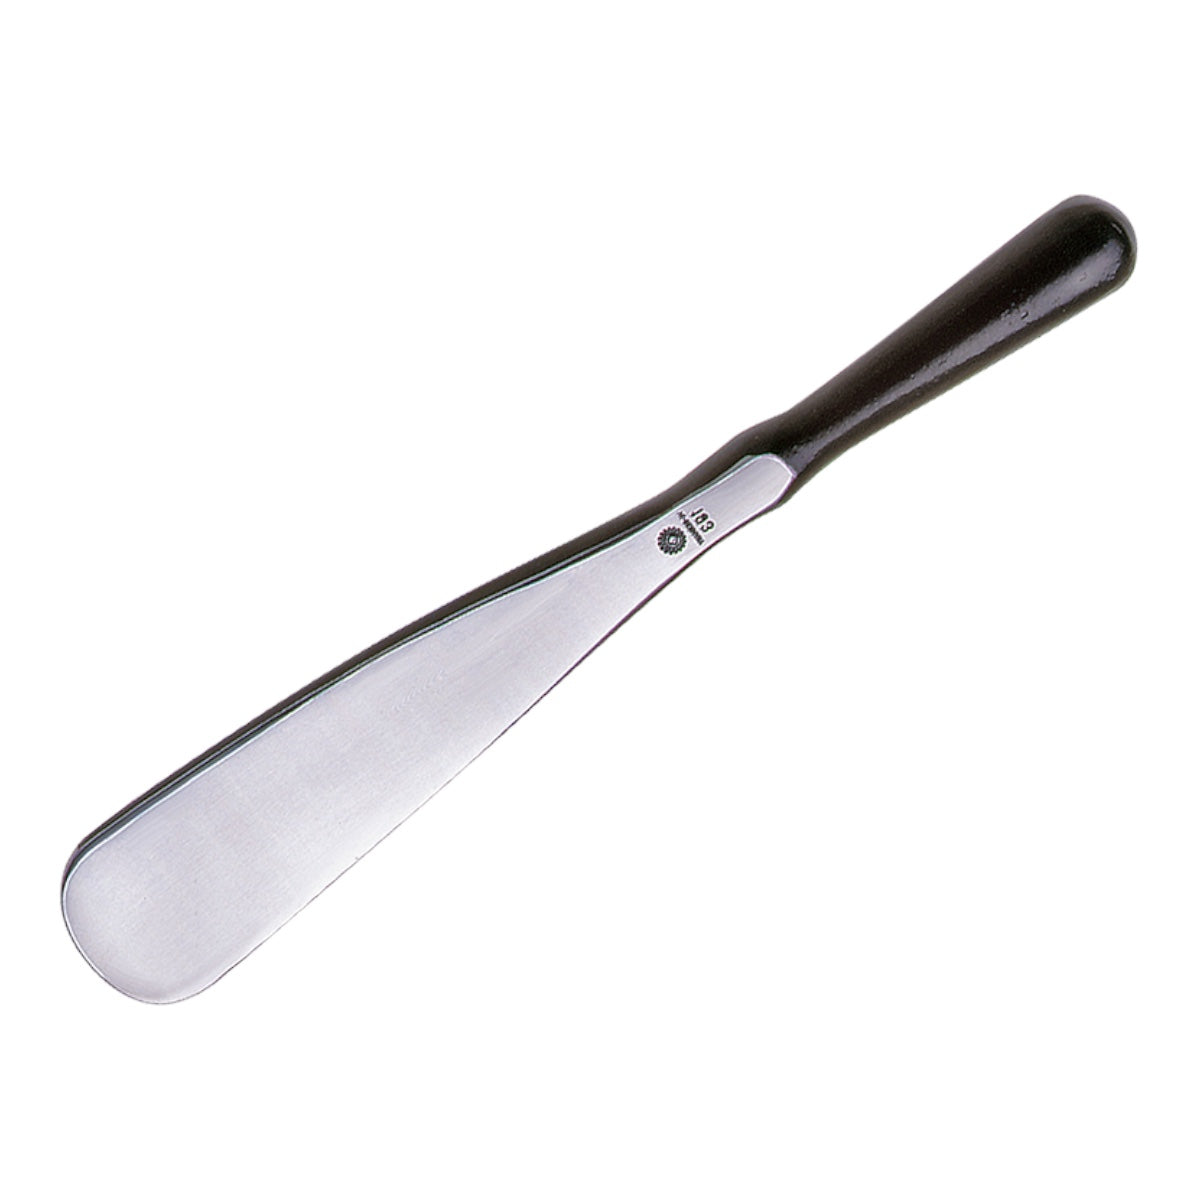 Spoon iron double curved